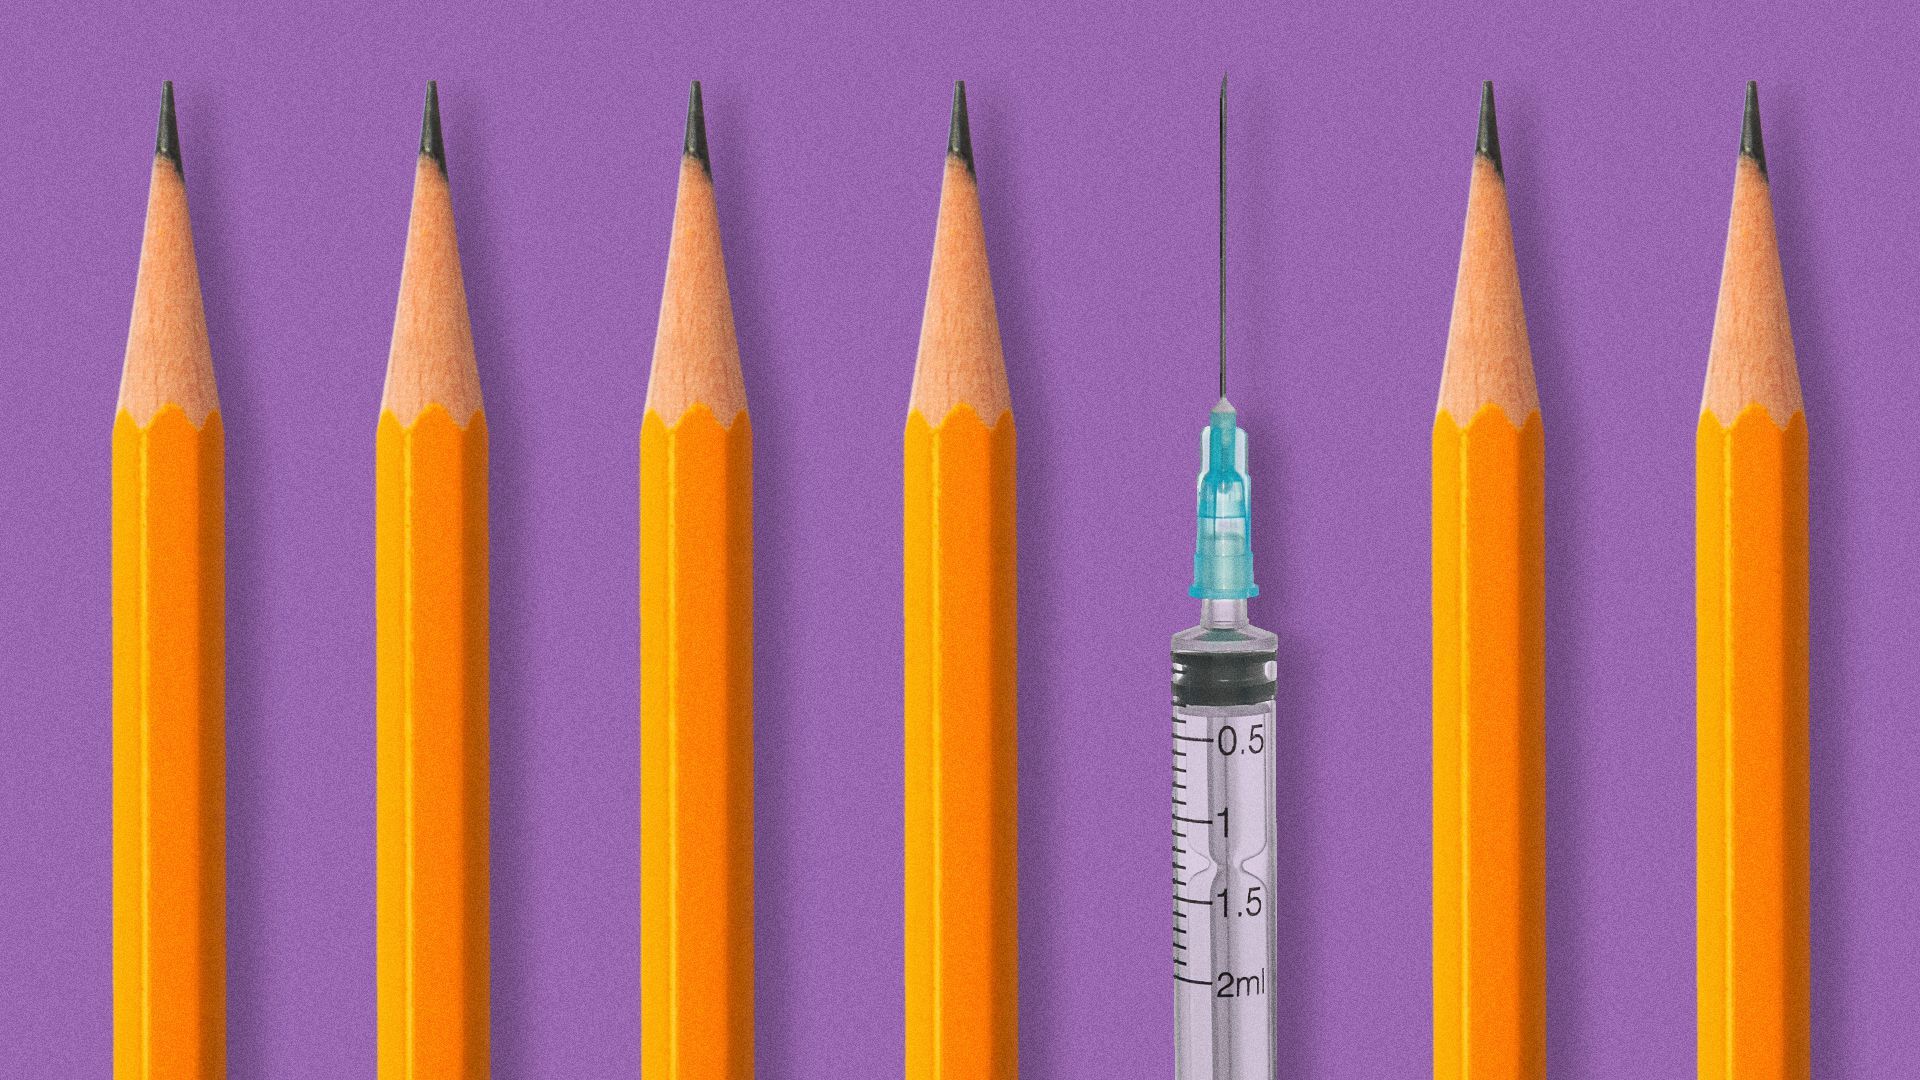 Illustration of a row of pencils with a vaccine syringe replacing one pencil.